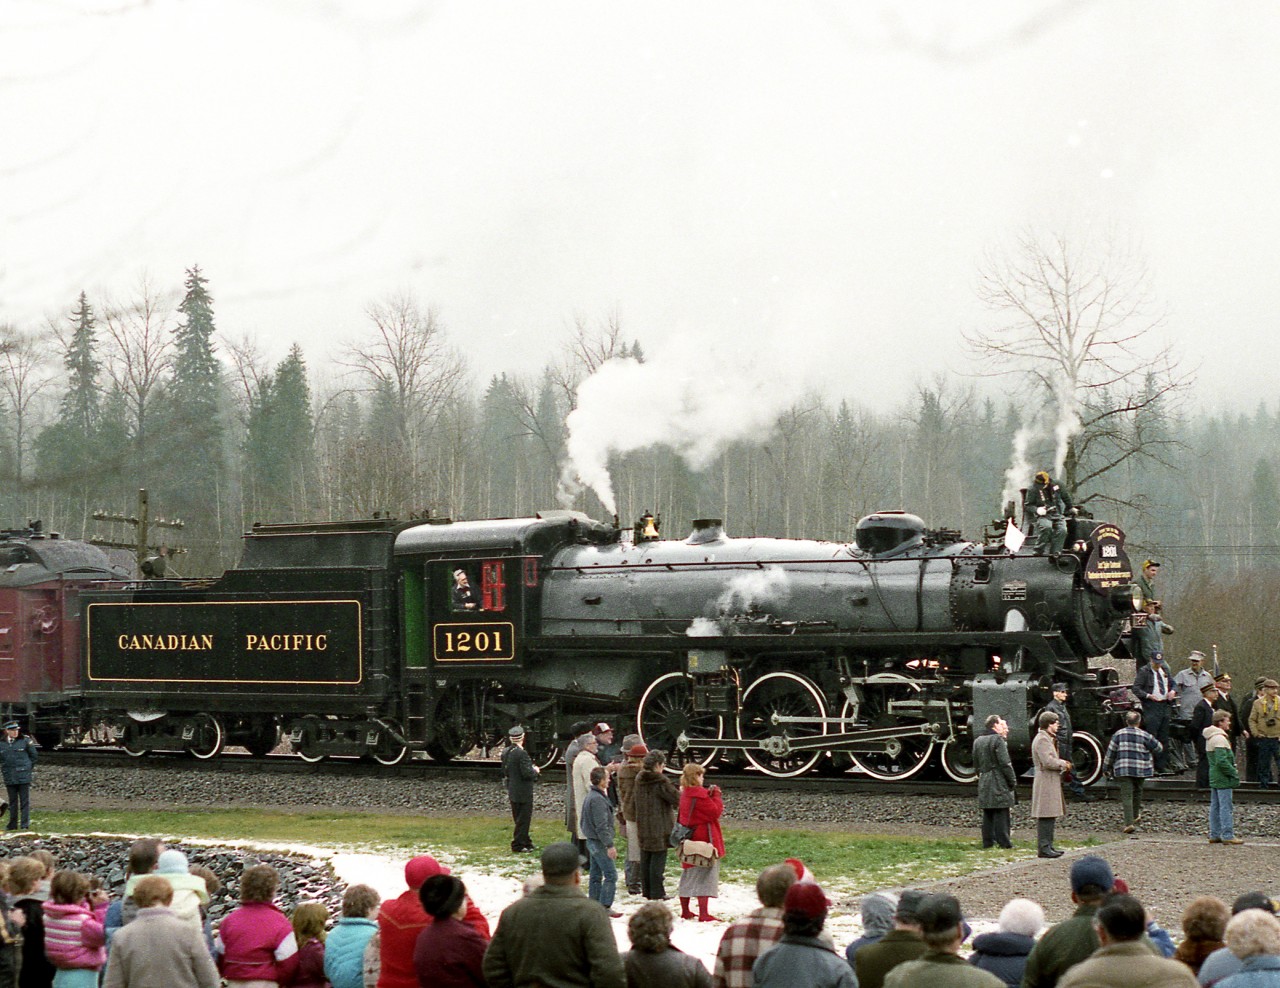 CP 4-6-2 1201, Last Angus built steam loco, is the centerpiece of the Centennial ceremony of the last spike held at Craigellachie